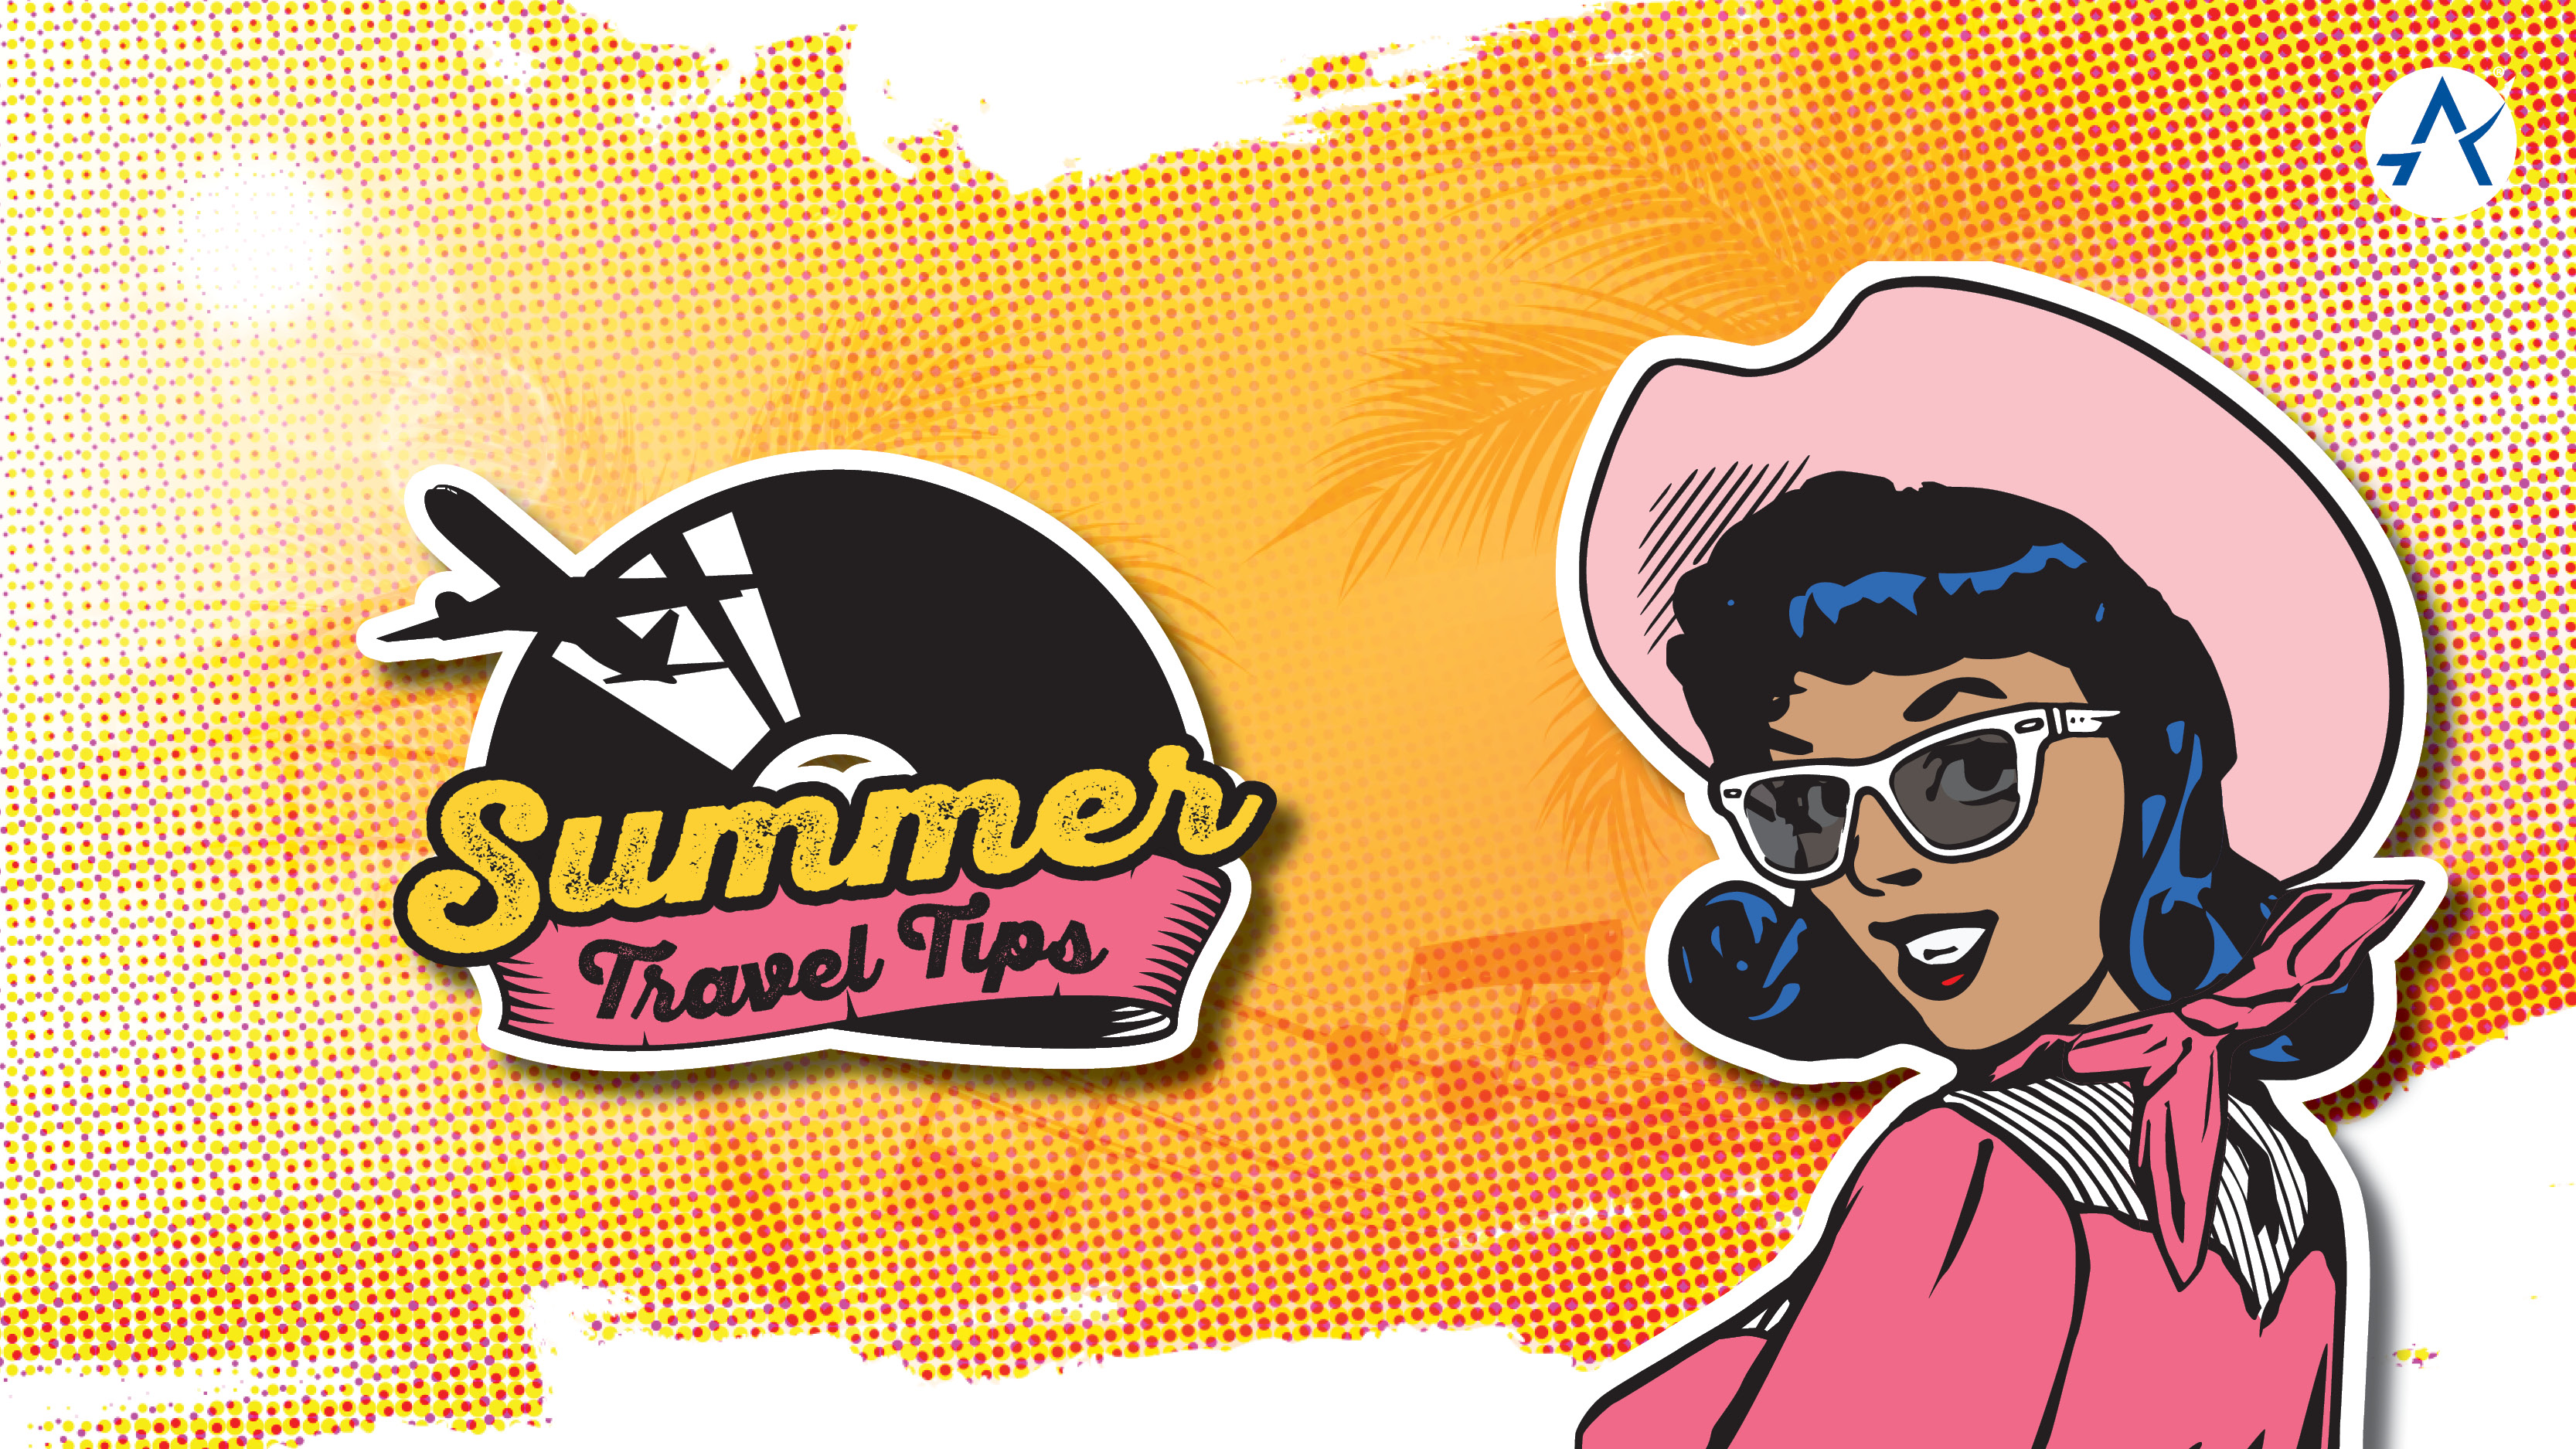 A graphic with Betty Sue character in the foreground and text that reads “Summer Travel Tips”  in the background